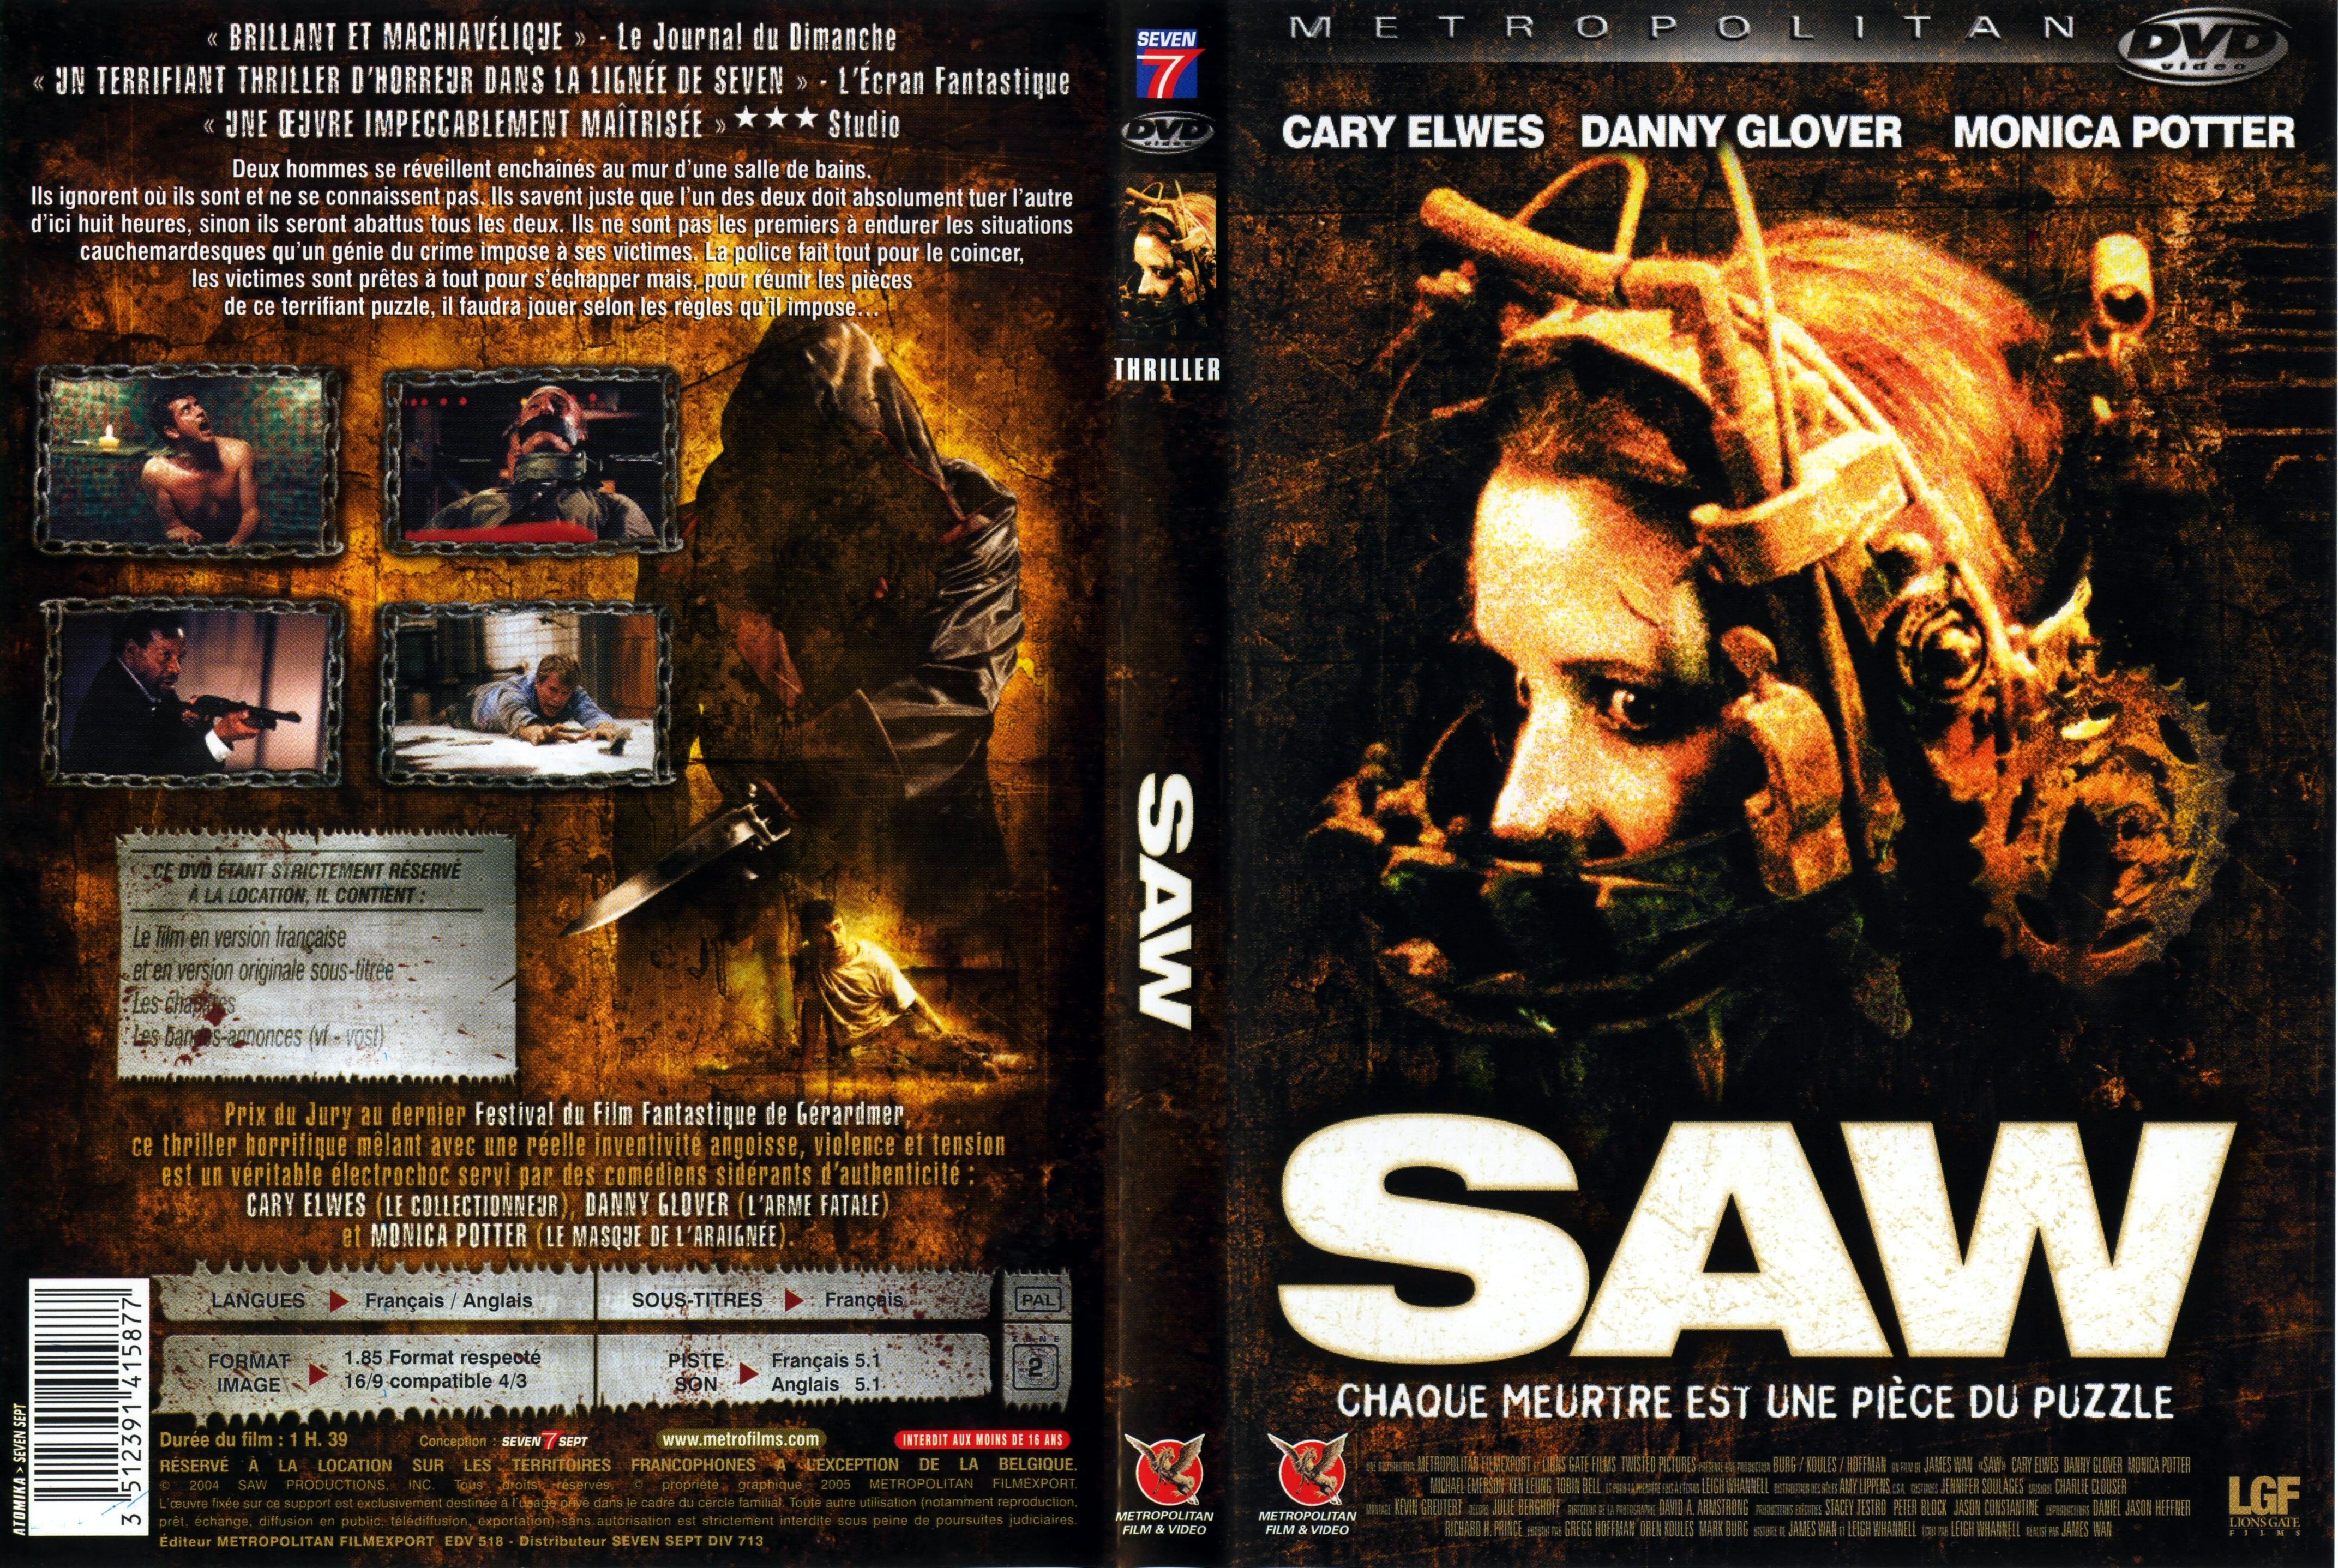 Jaquette DVD Saw